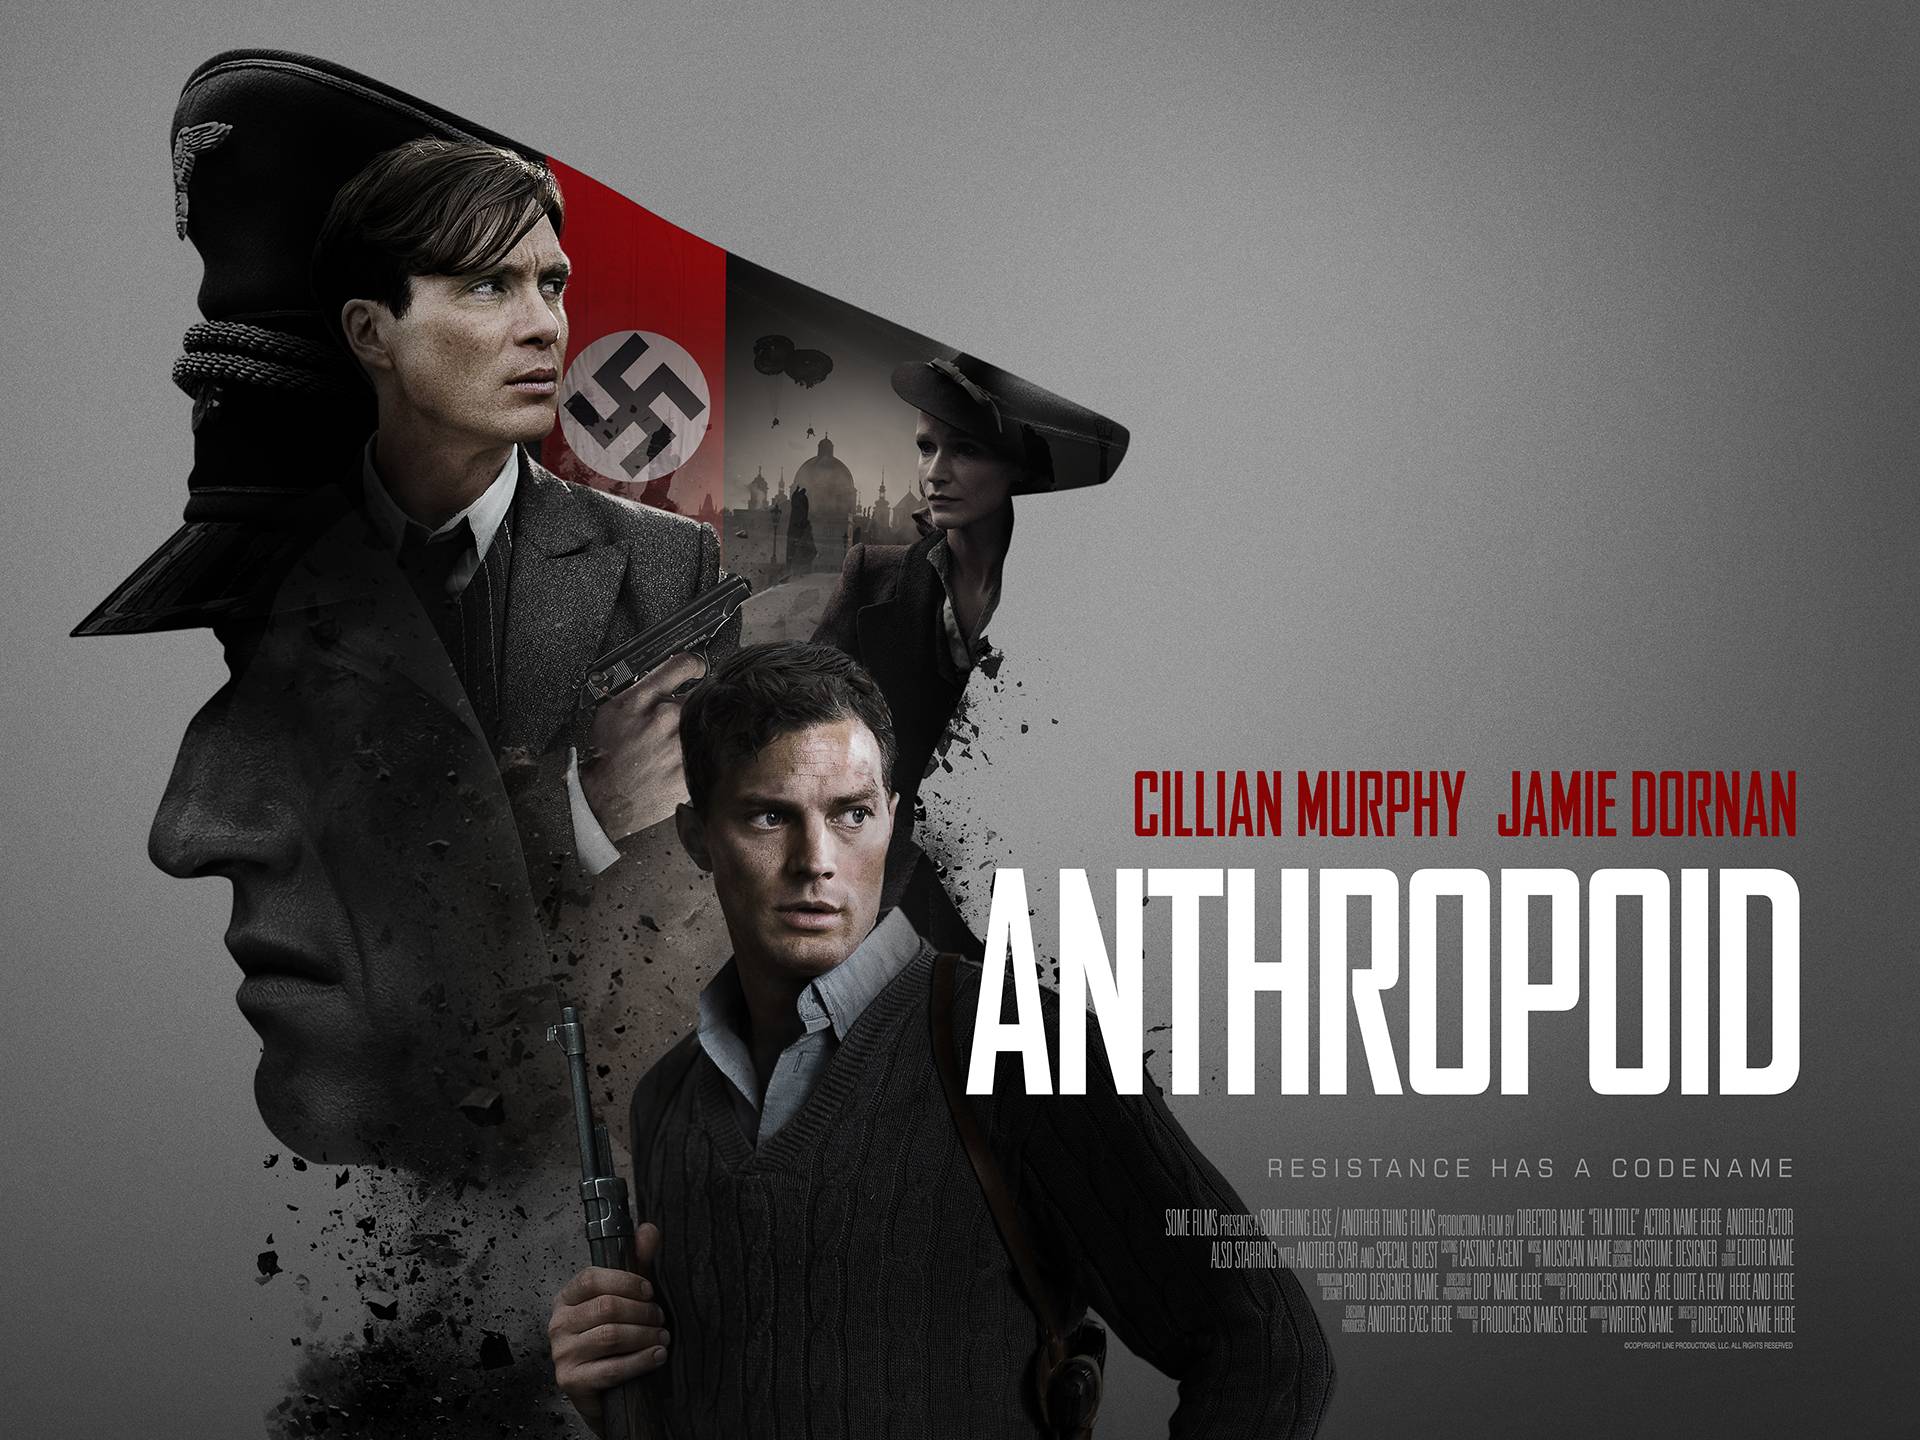 Anthropoid Resistance Has a Codename starring Cilliam Murphy and Jamie Dornan